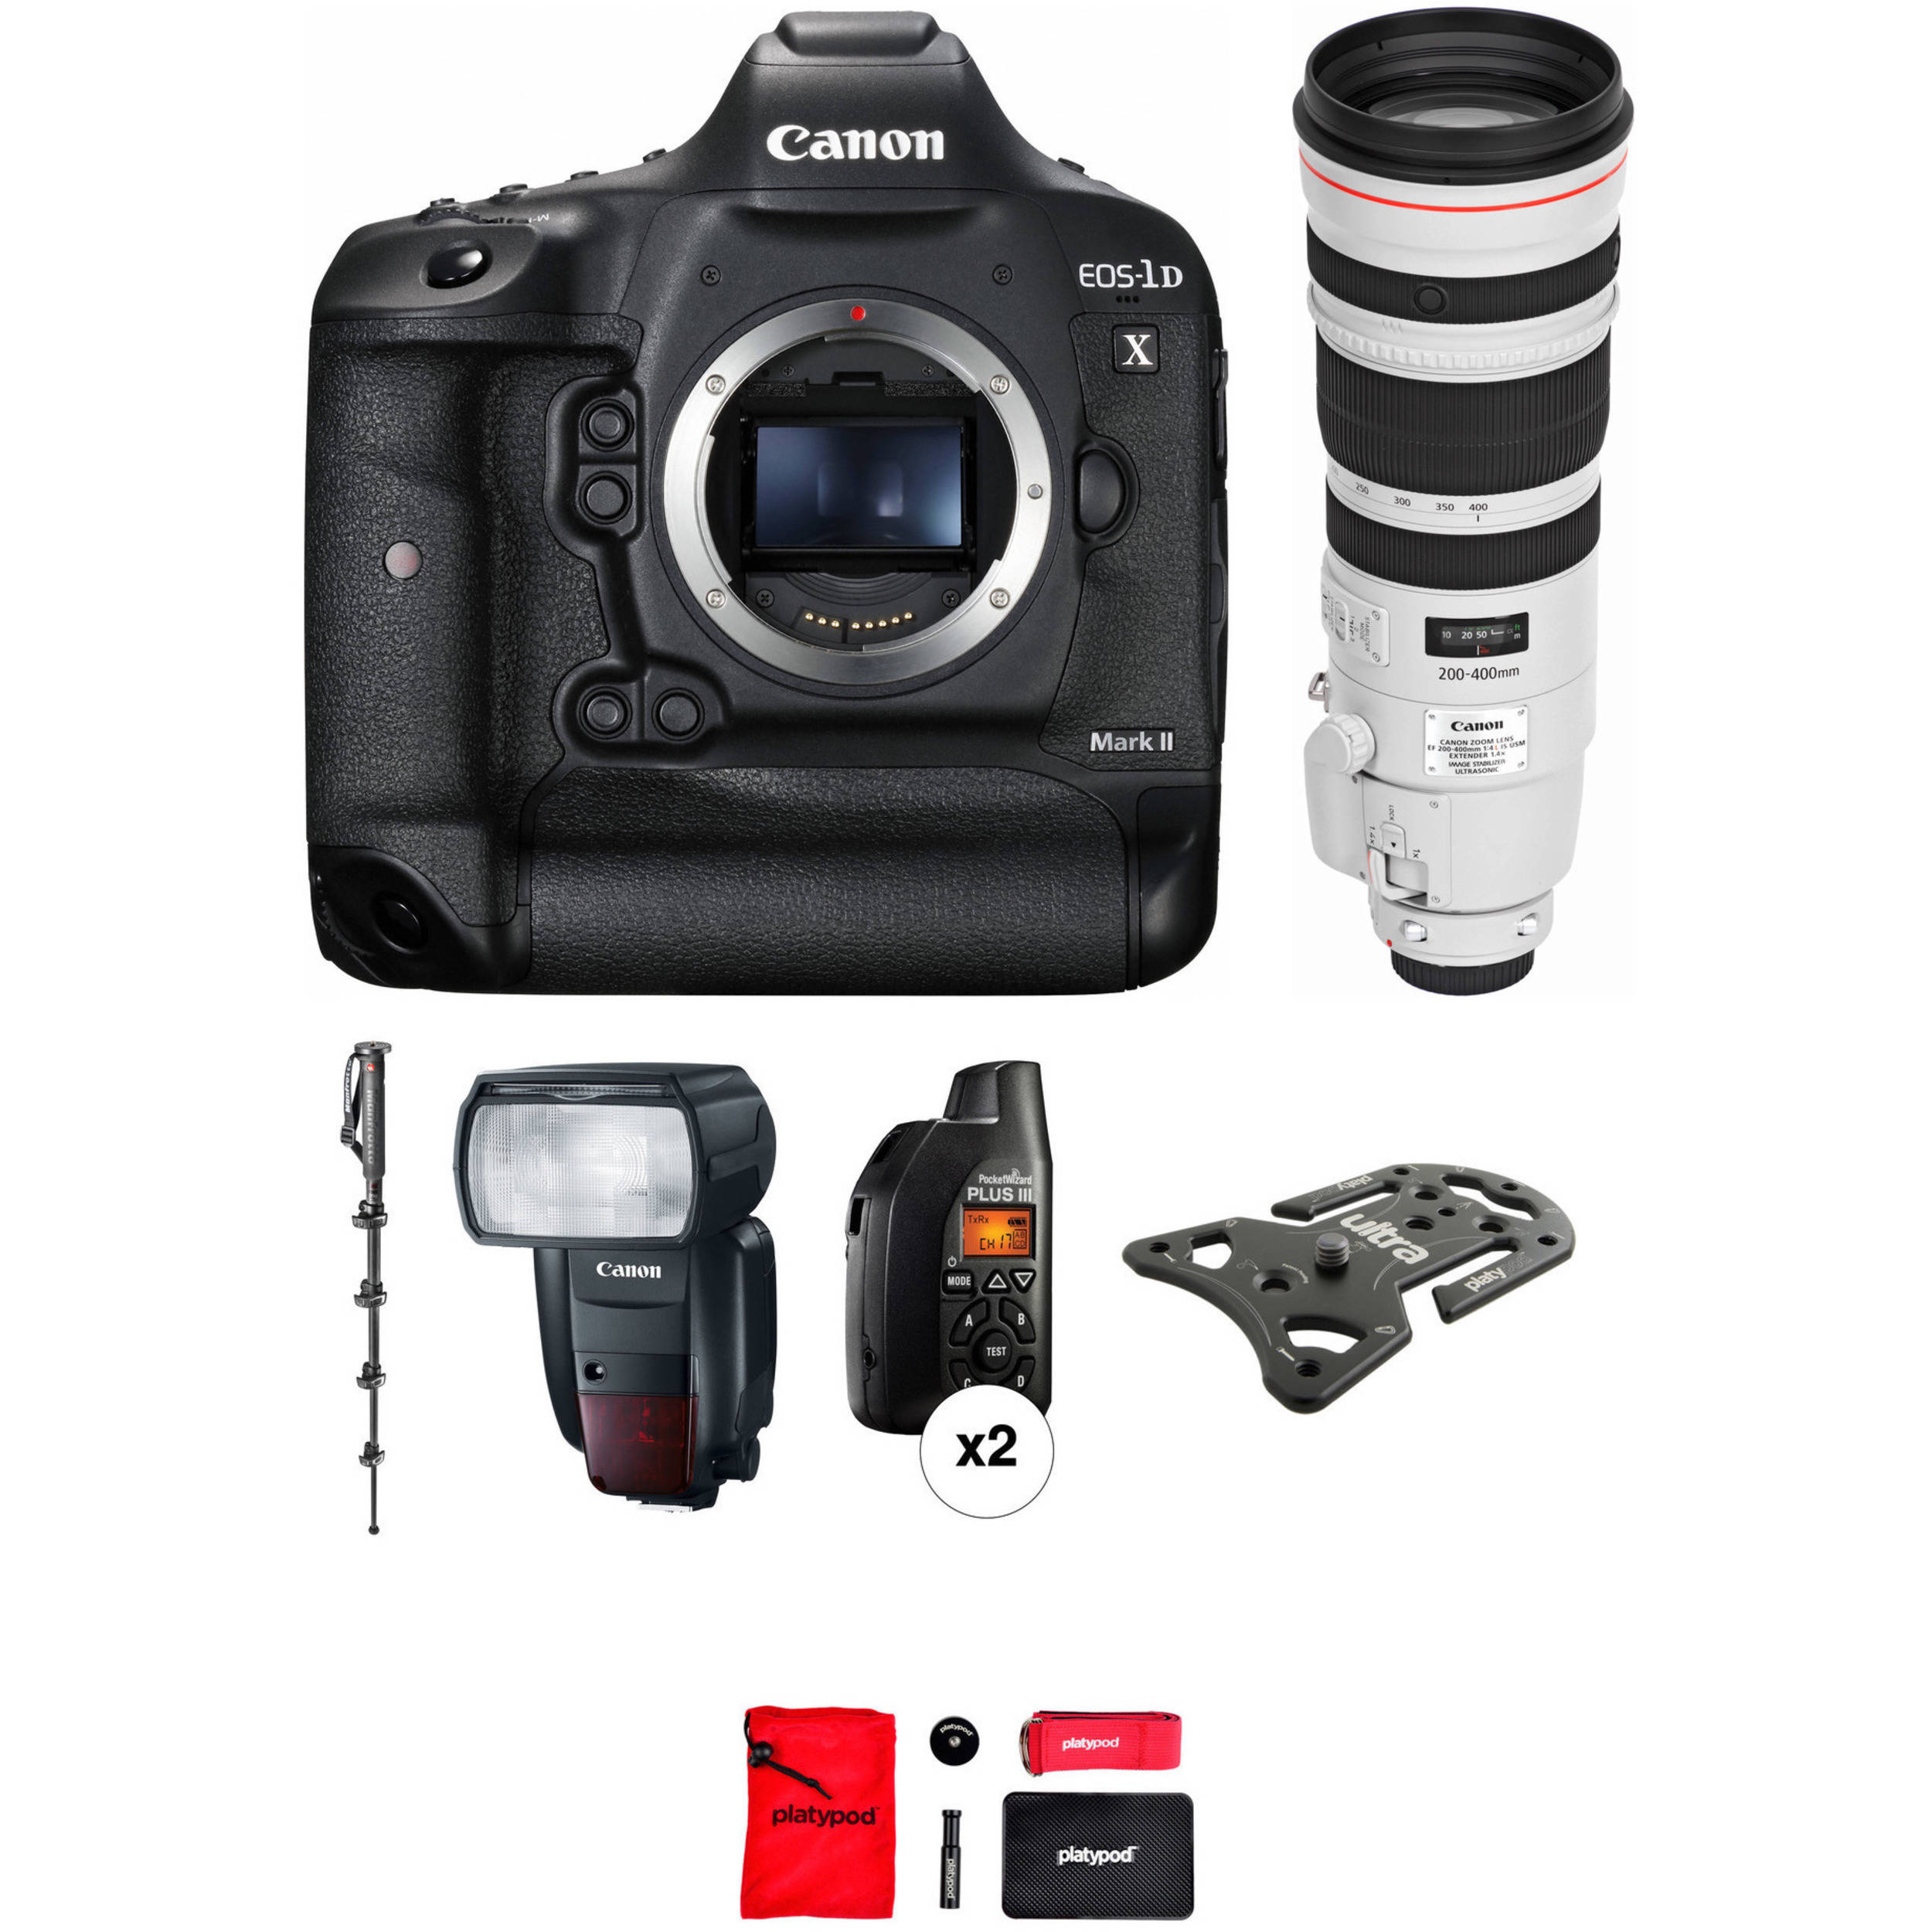 Canon Eos 1d X Mark Ii Dslr Camera With 0 400mm Lens Sports